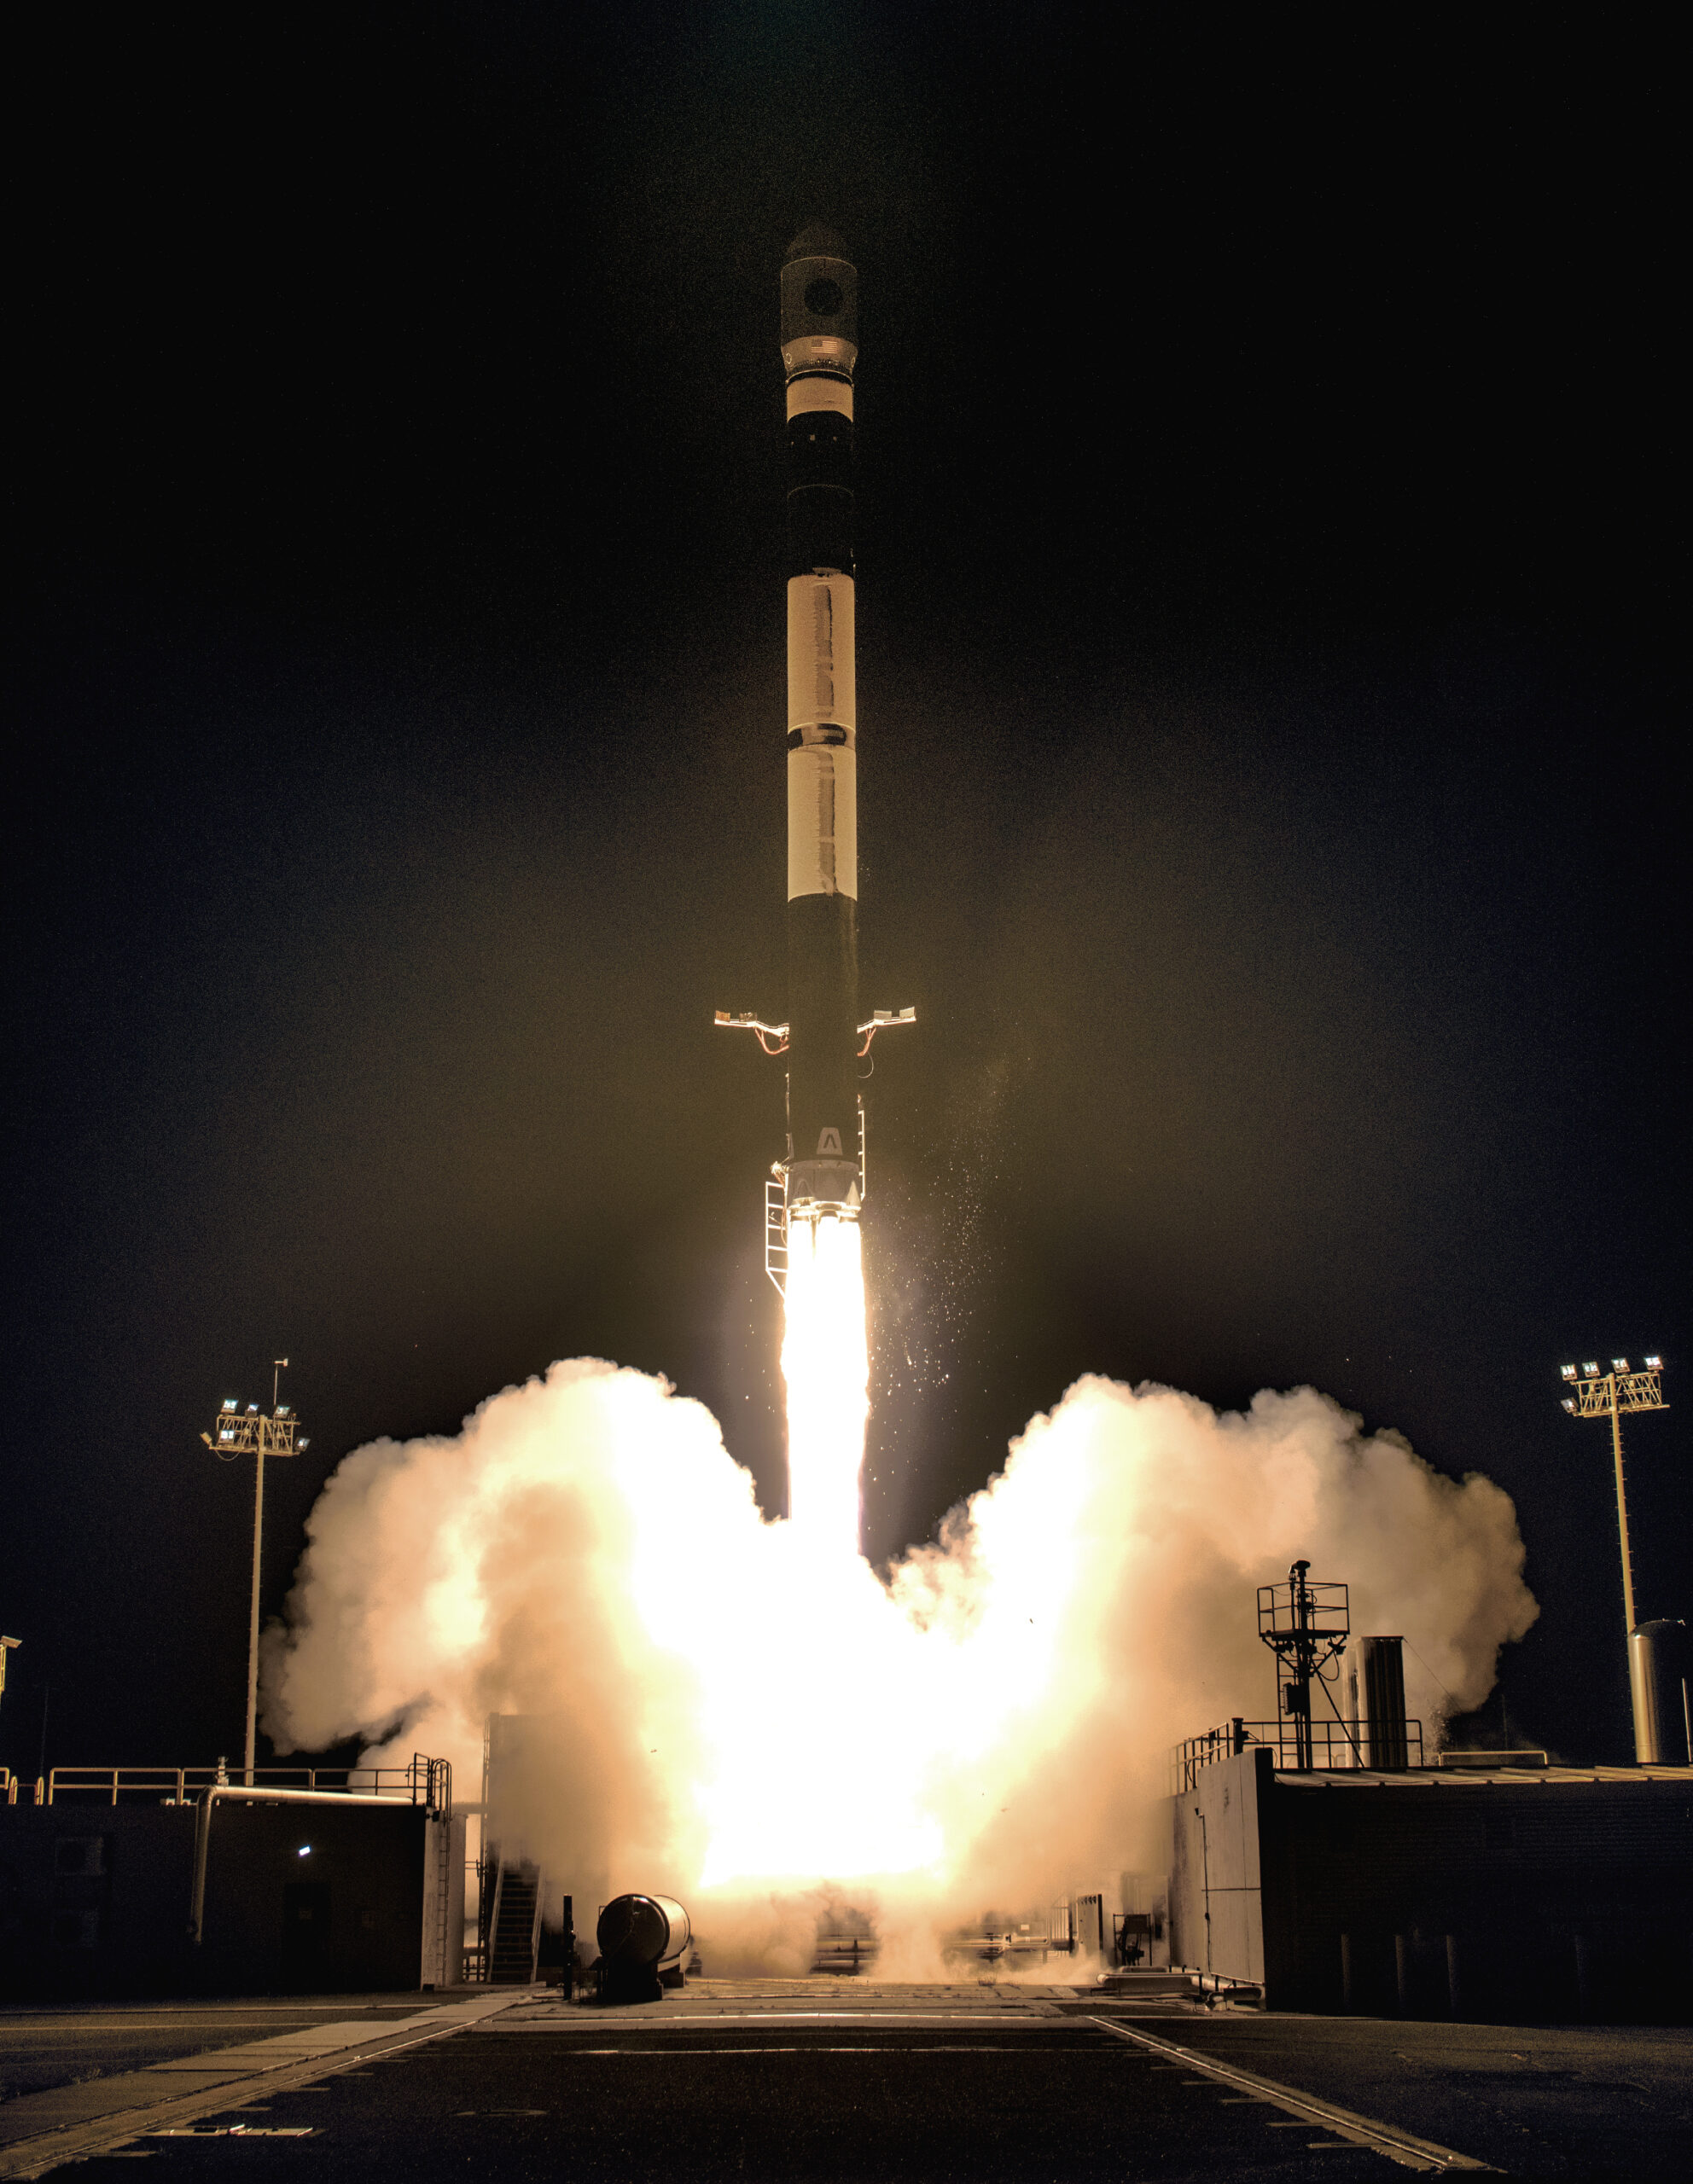 Firefly Alpha FLTA003 VICTUS NOX Launch from Vandenberg Space Force Base (3)